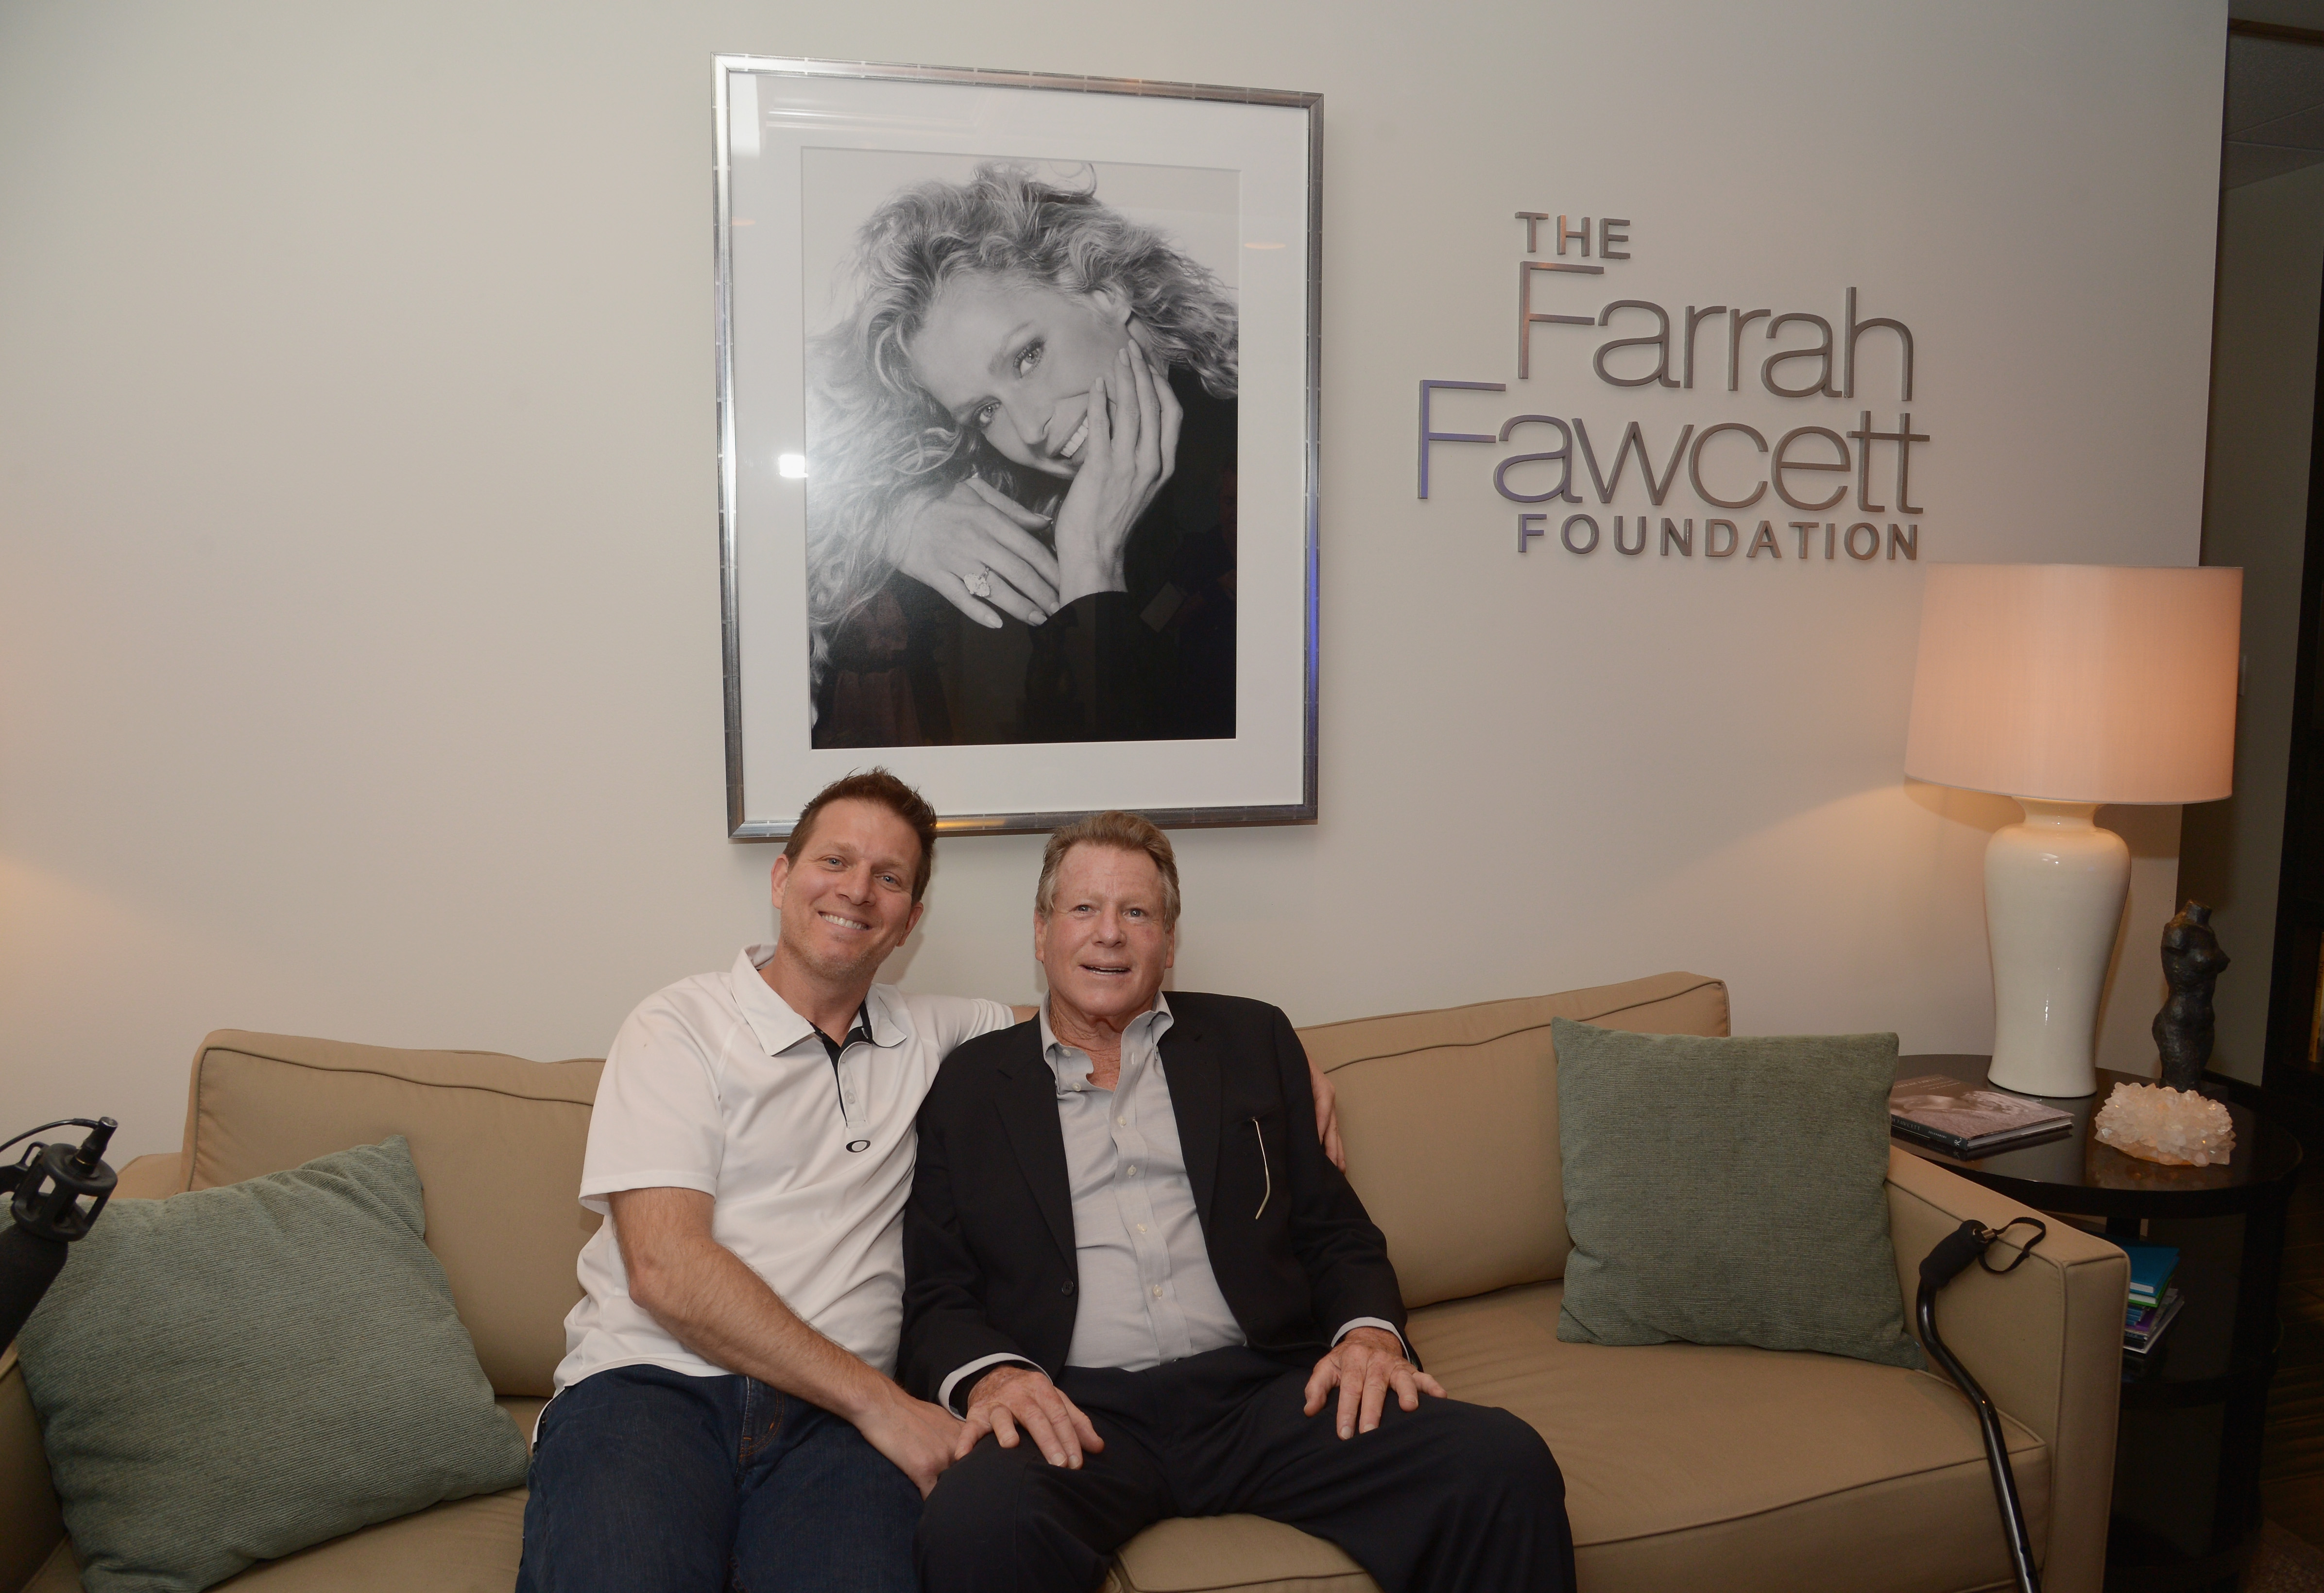 Patrick O'Neal and Ryan O'Neal at the Farrah Fawcett Foundation on June 25, 2014 in Beverly Hills, California | Source: Getty Images